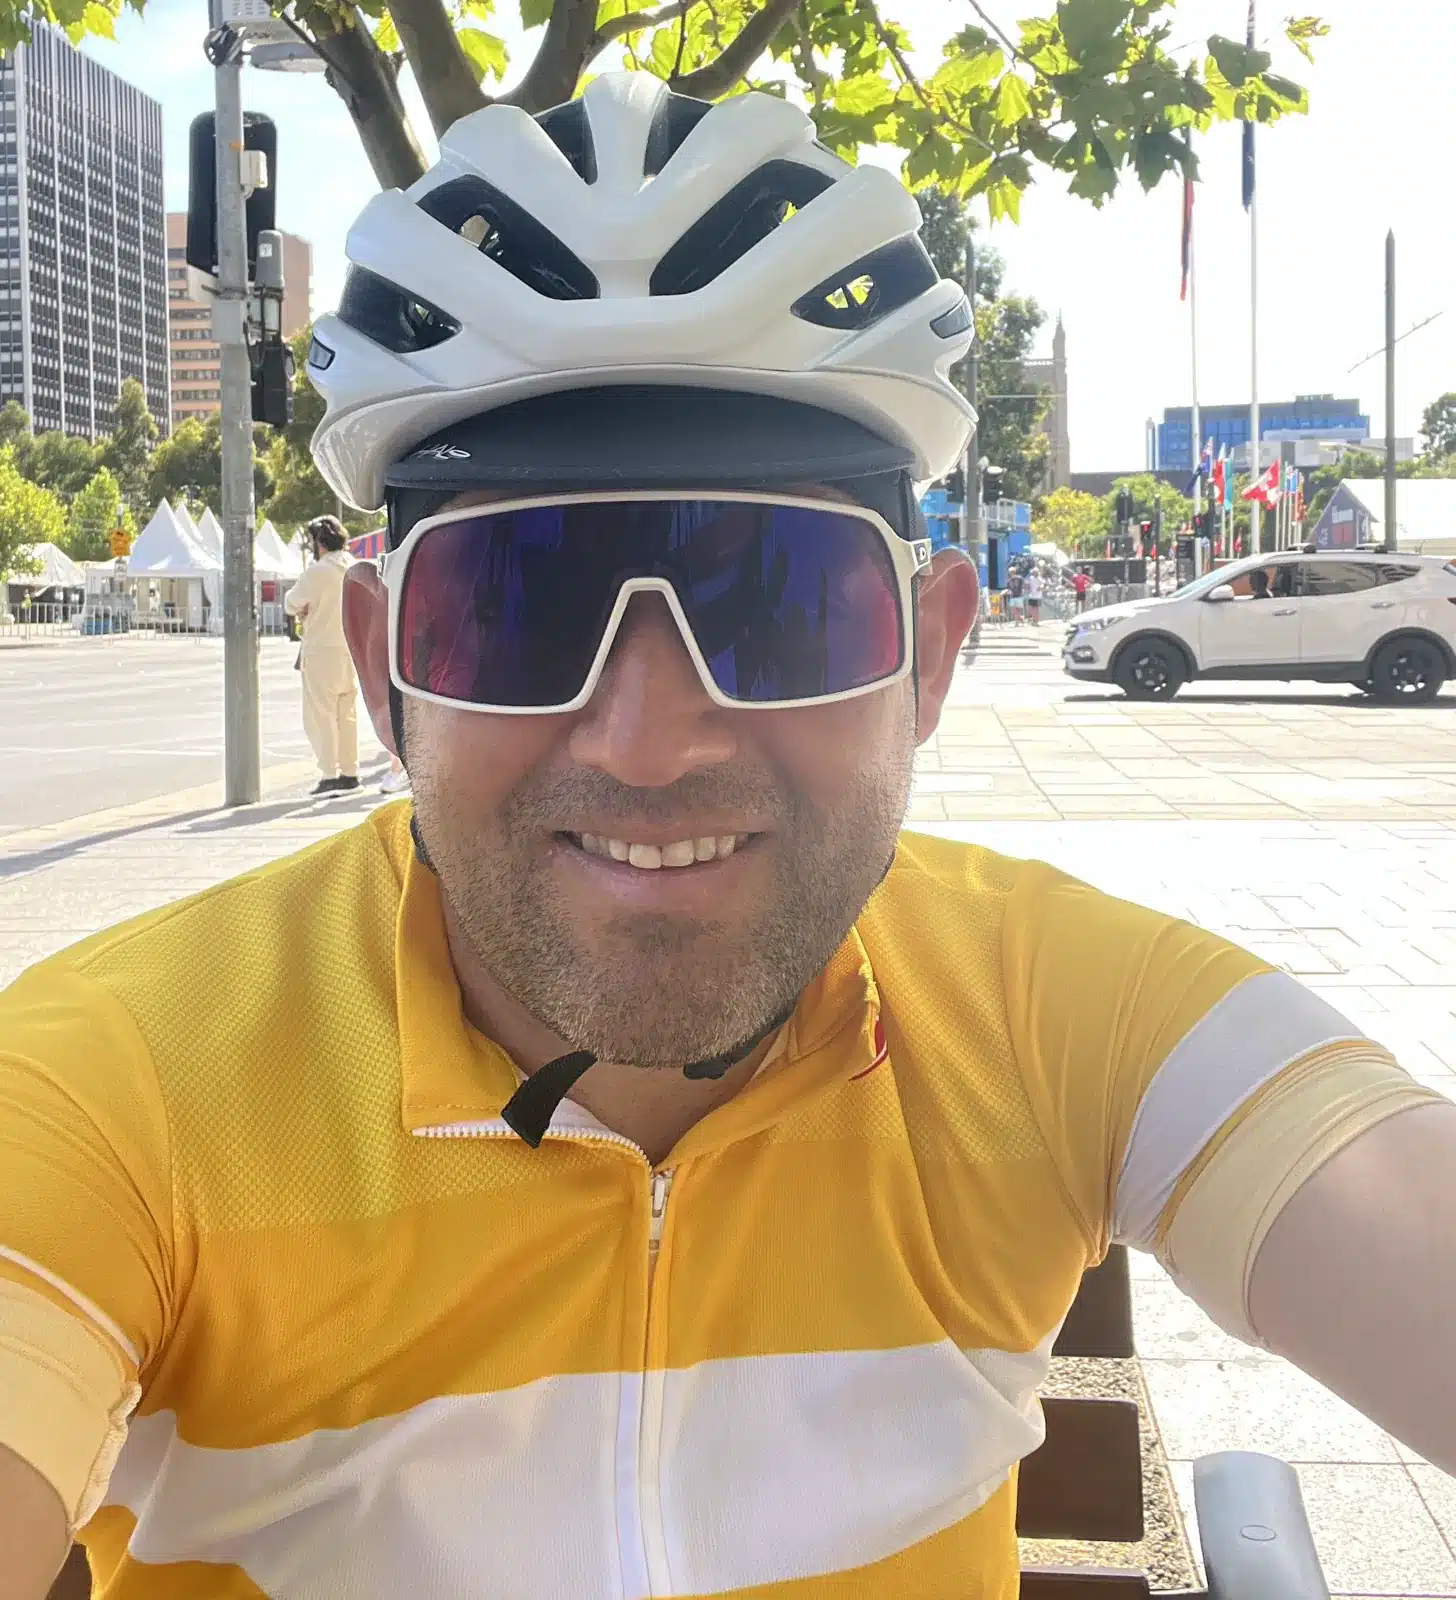 A cyclist wearing a helmet and sunglasses takes a selfie in an urban setting.